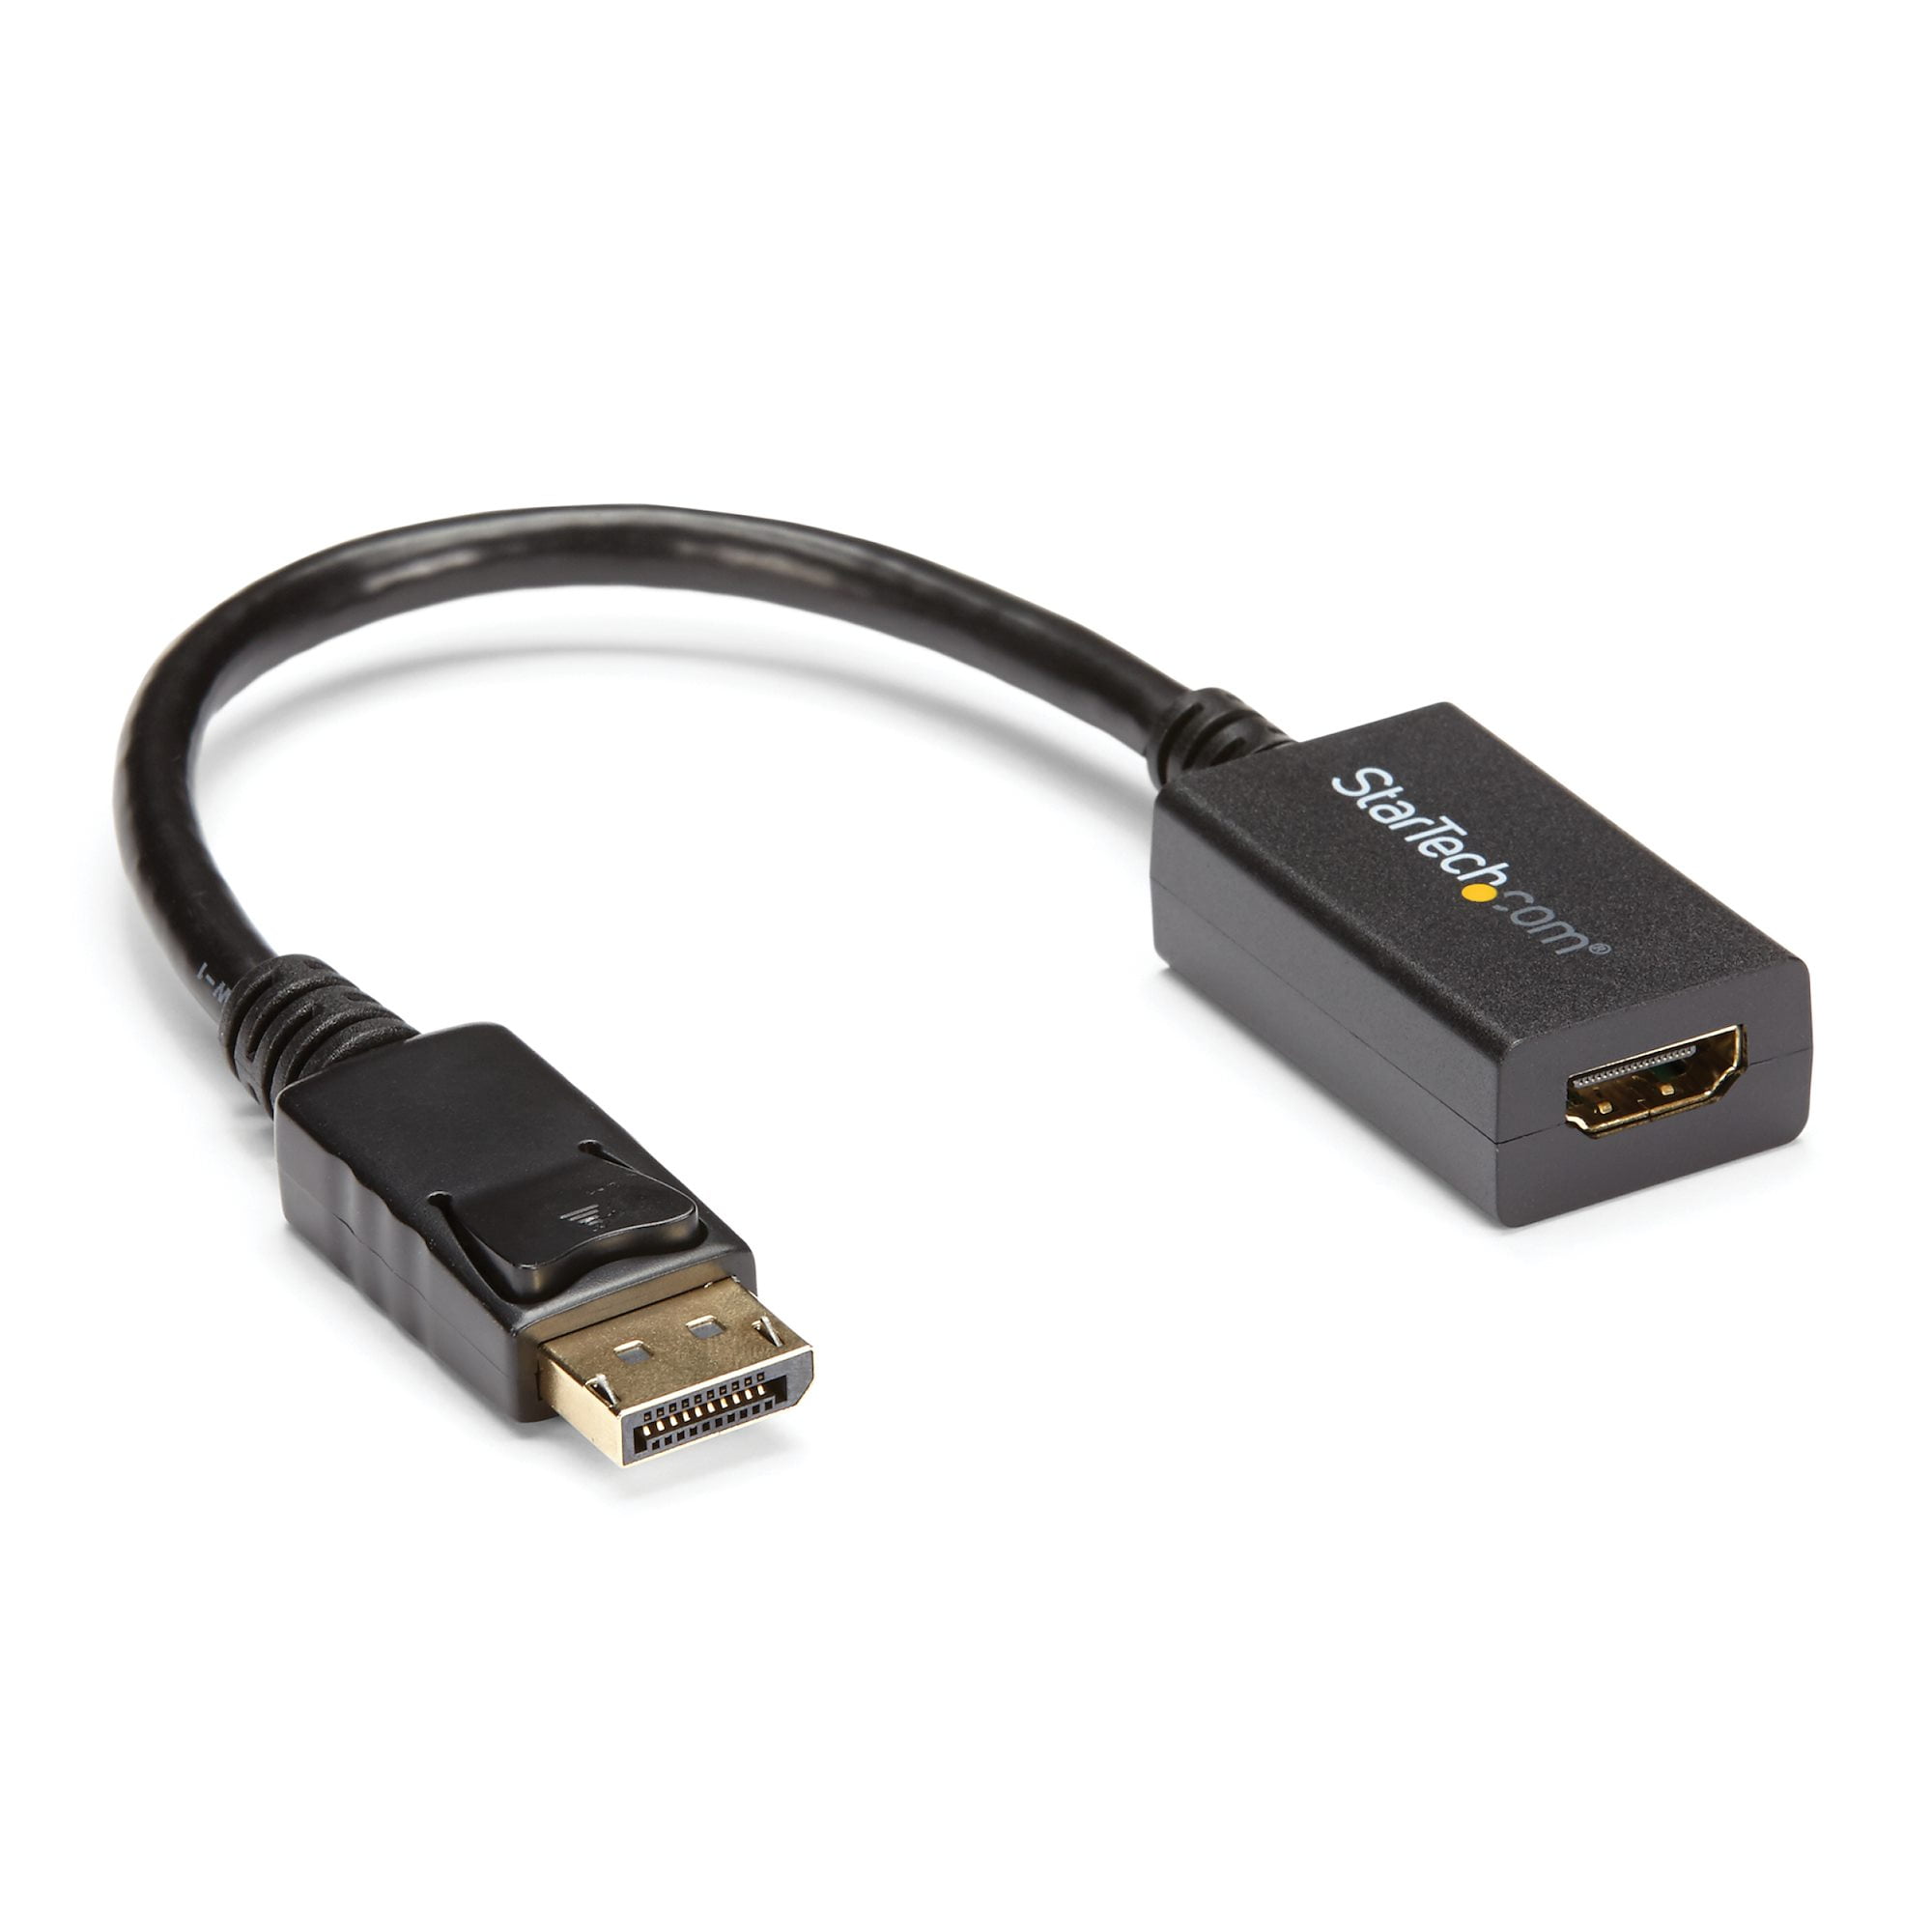 Vivitar HDMI to USB Video Converter with Real-Time HDMI Video and Audio for  Live Streaming, Includes USB-C Adapter Cable, Black 